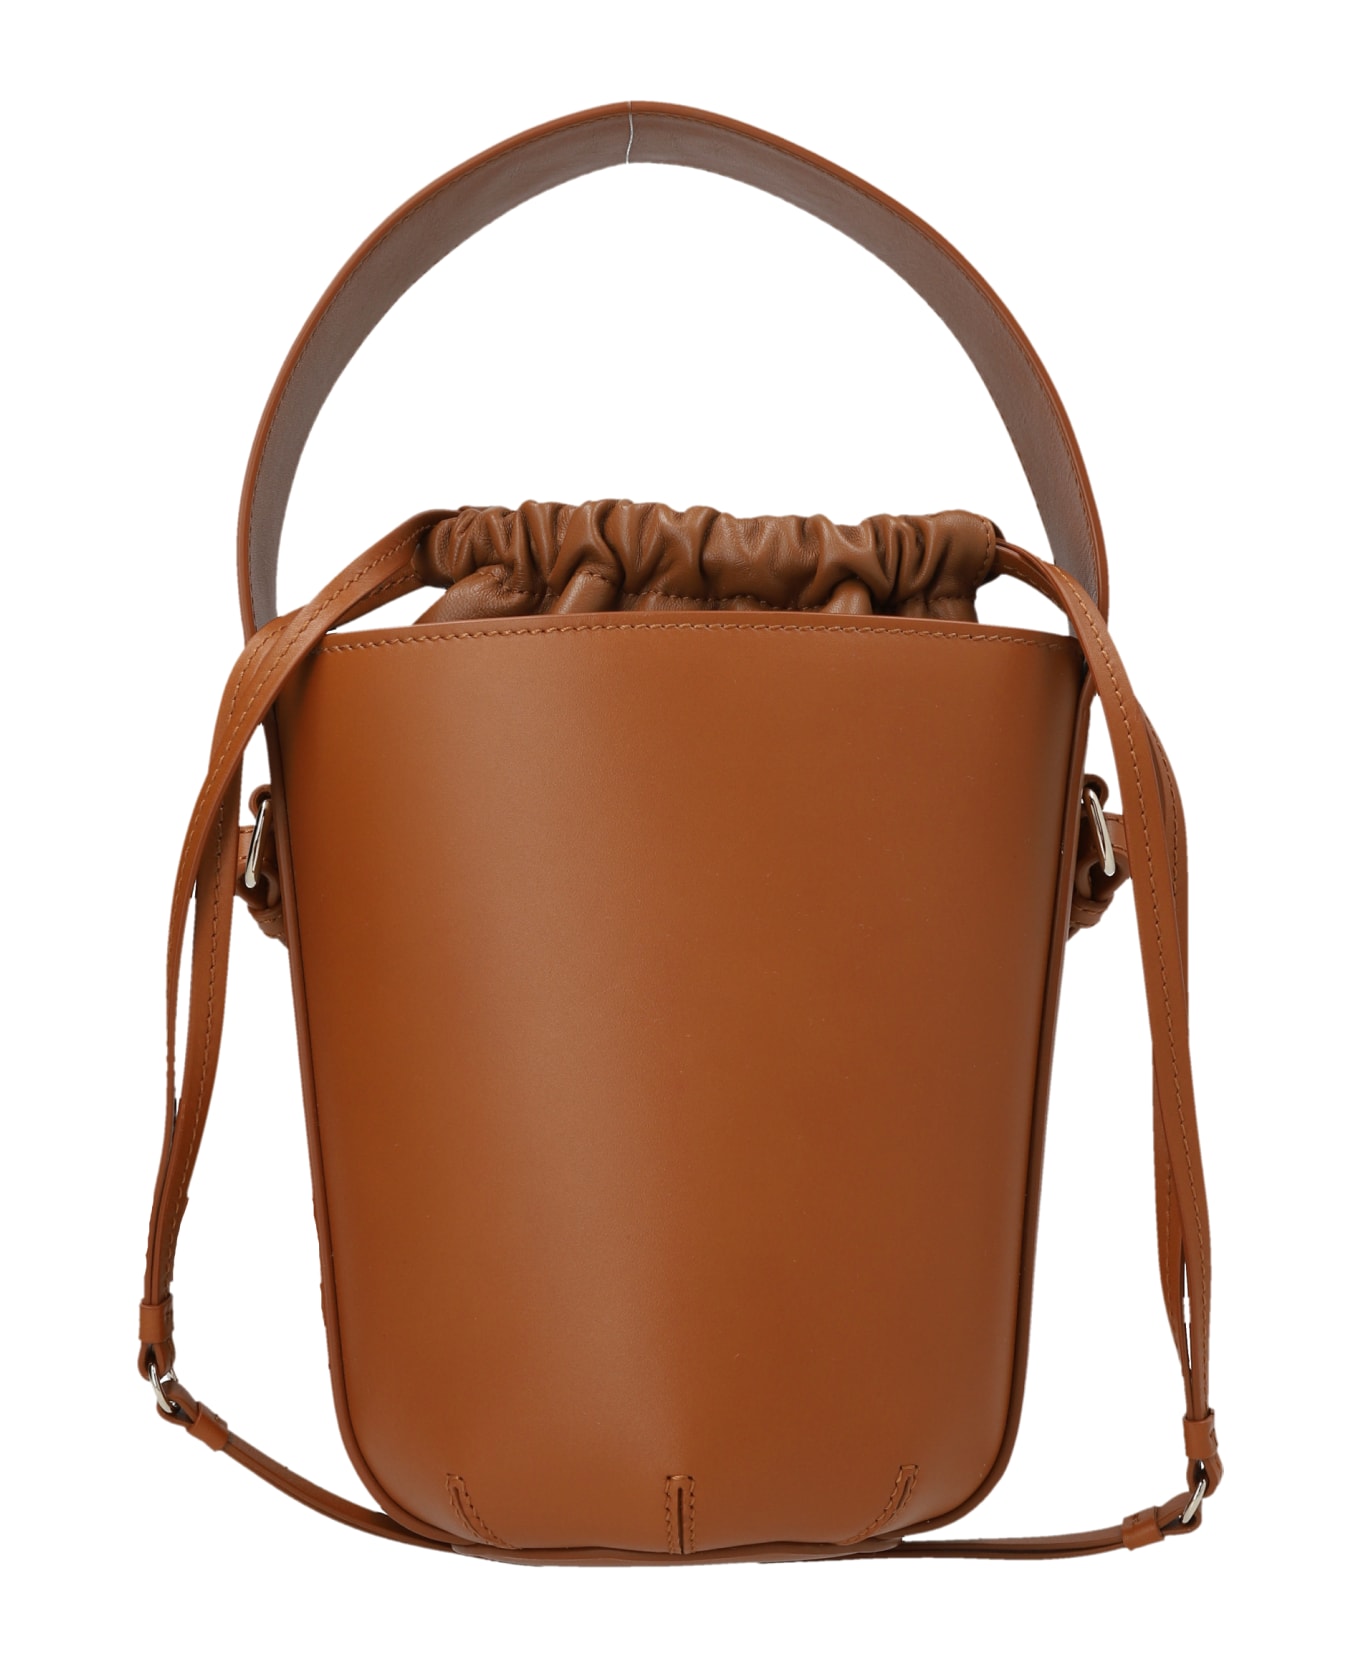 Chloé Leather Bucket Bag - Brown トートバッグ